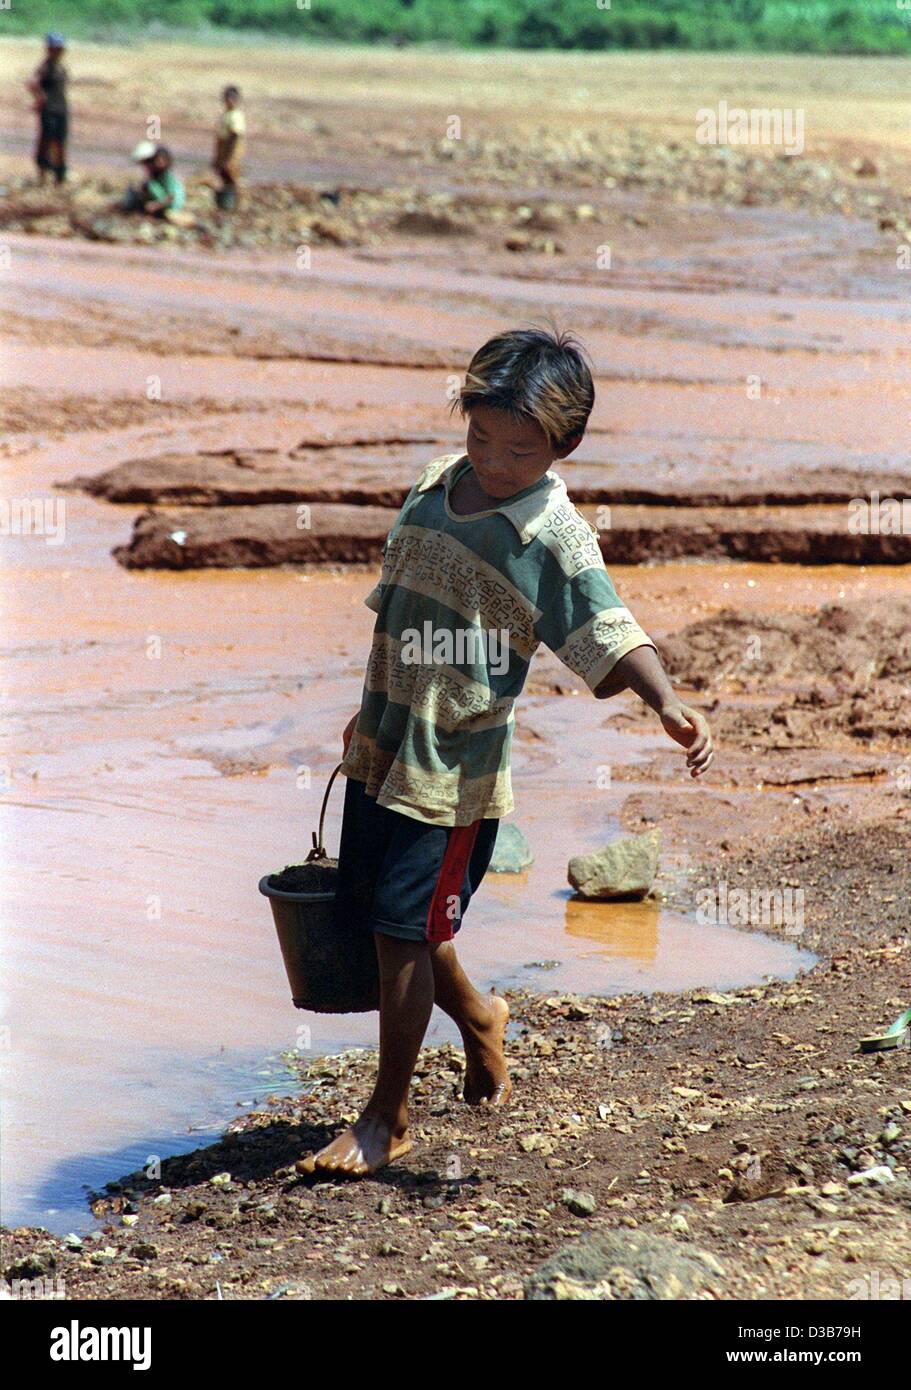 (dpa) - A boy carries a bucket of water along the banks of a river in which tin is washed, near the village of Hin Bun Ban Bon-Nai, Laos, October 2002. Laos is one of the world's poorest countries. Children often have to work or are forced to prostitution. They are often violently abducted from thei Stock Photo